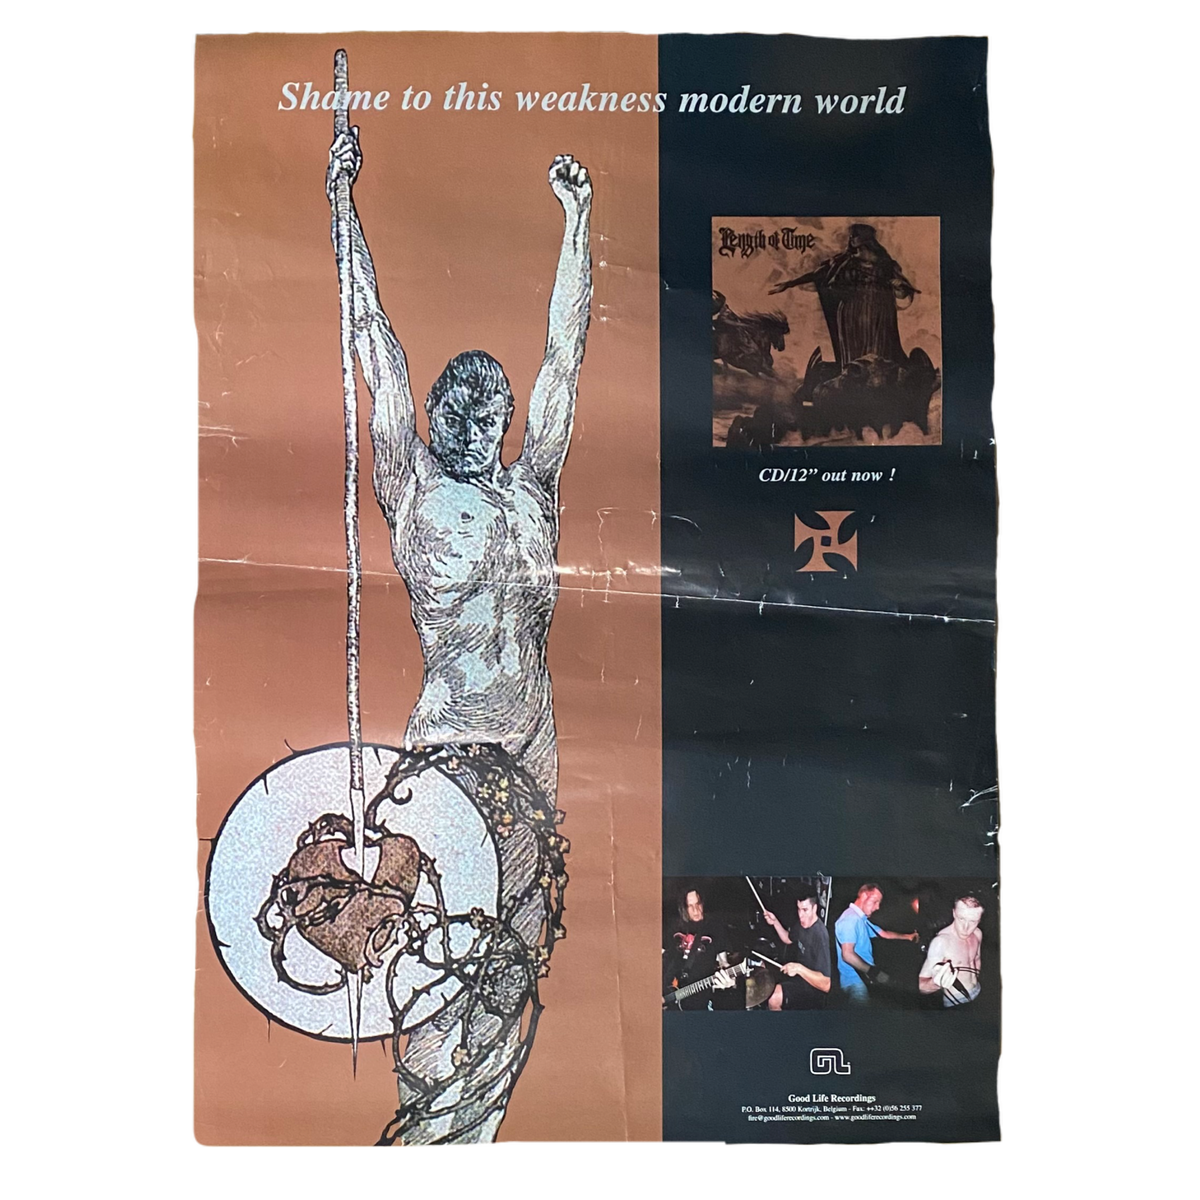 Vintage Length Of Time &quot;Shame To This Weakness Modern World&quot; Good Life Recordings Poster